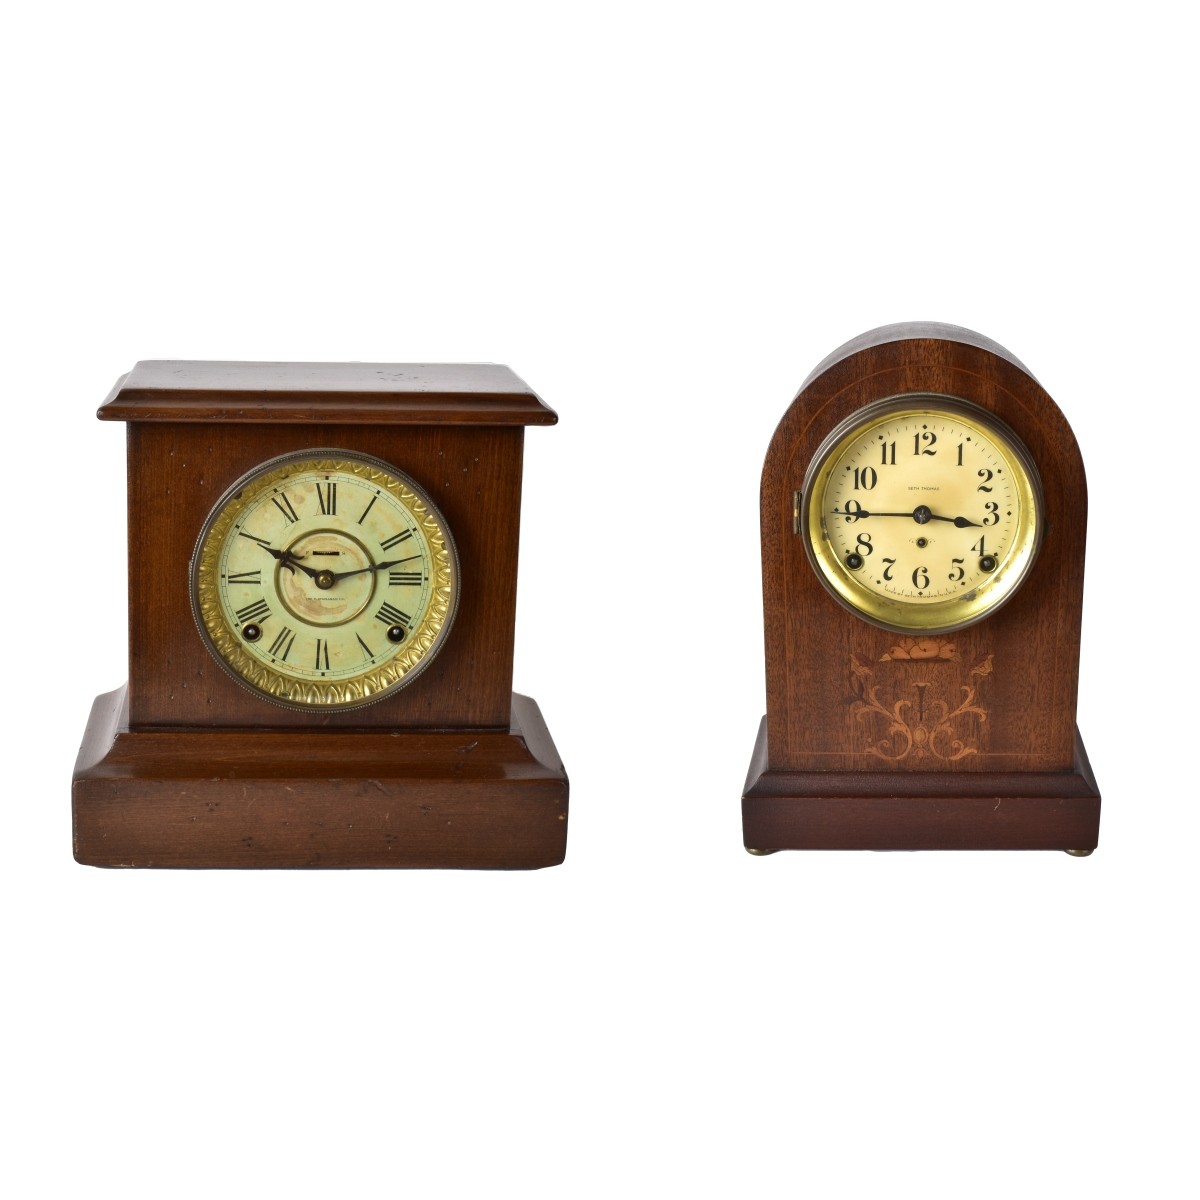 Lot of Two Mantle Clocks